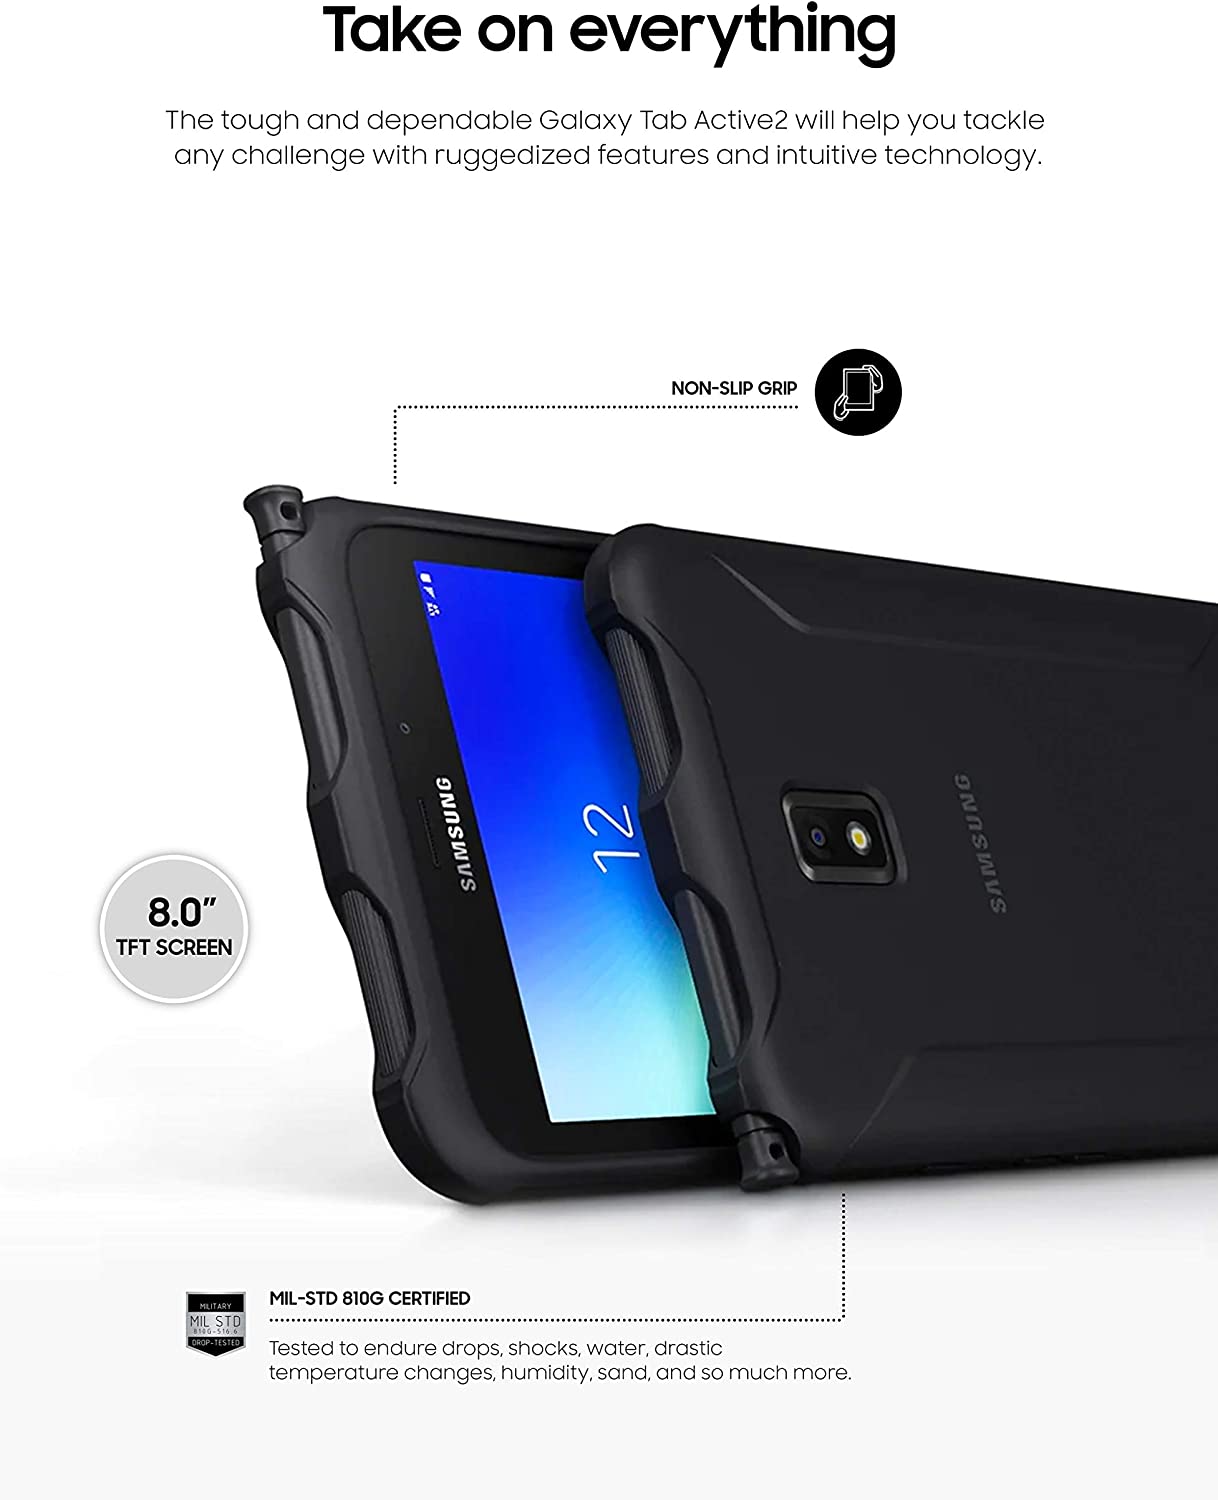 Samsung Galaxy Tab Active 2 w Pen & Rugged Case (4G) LTE 8inch Rugged 3GB Ram IP68 Android 9.0  *Free Shipping*